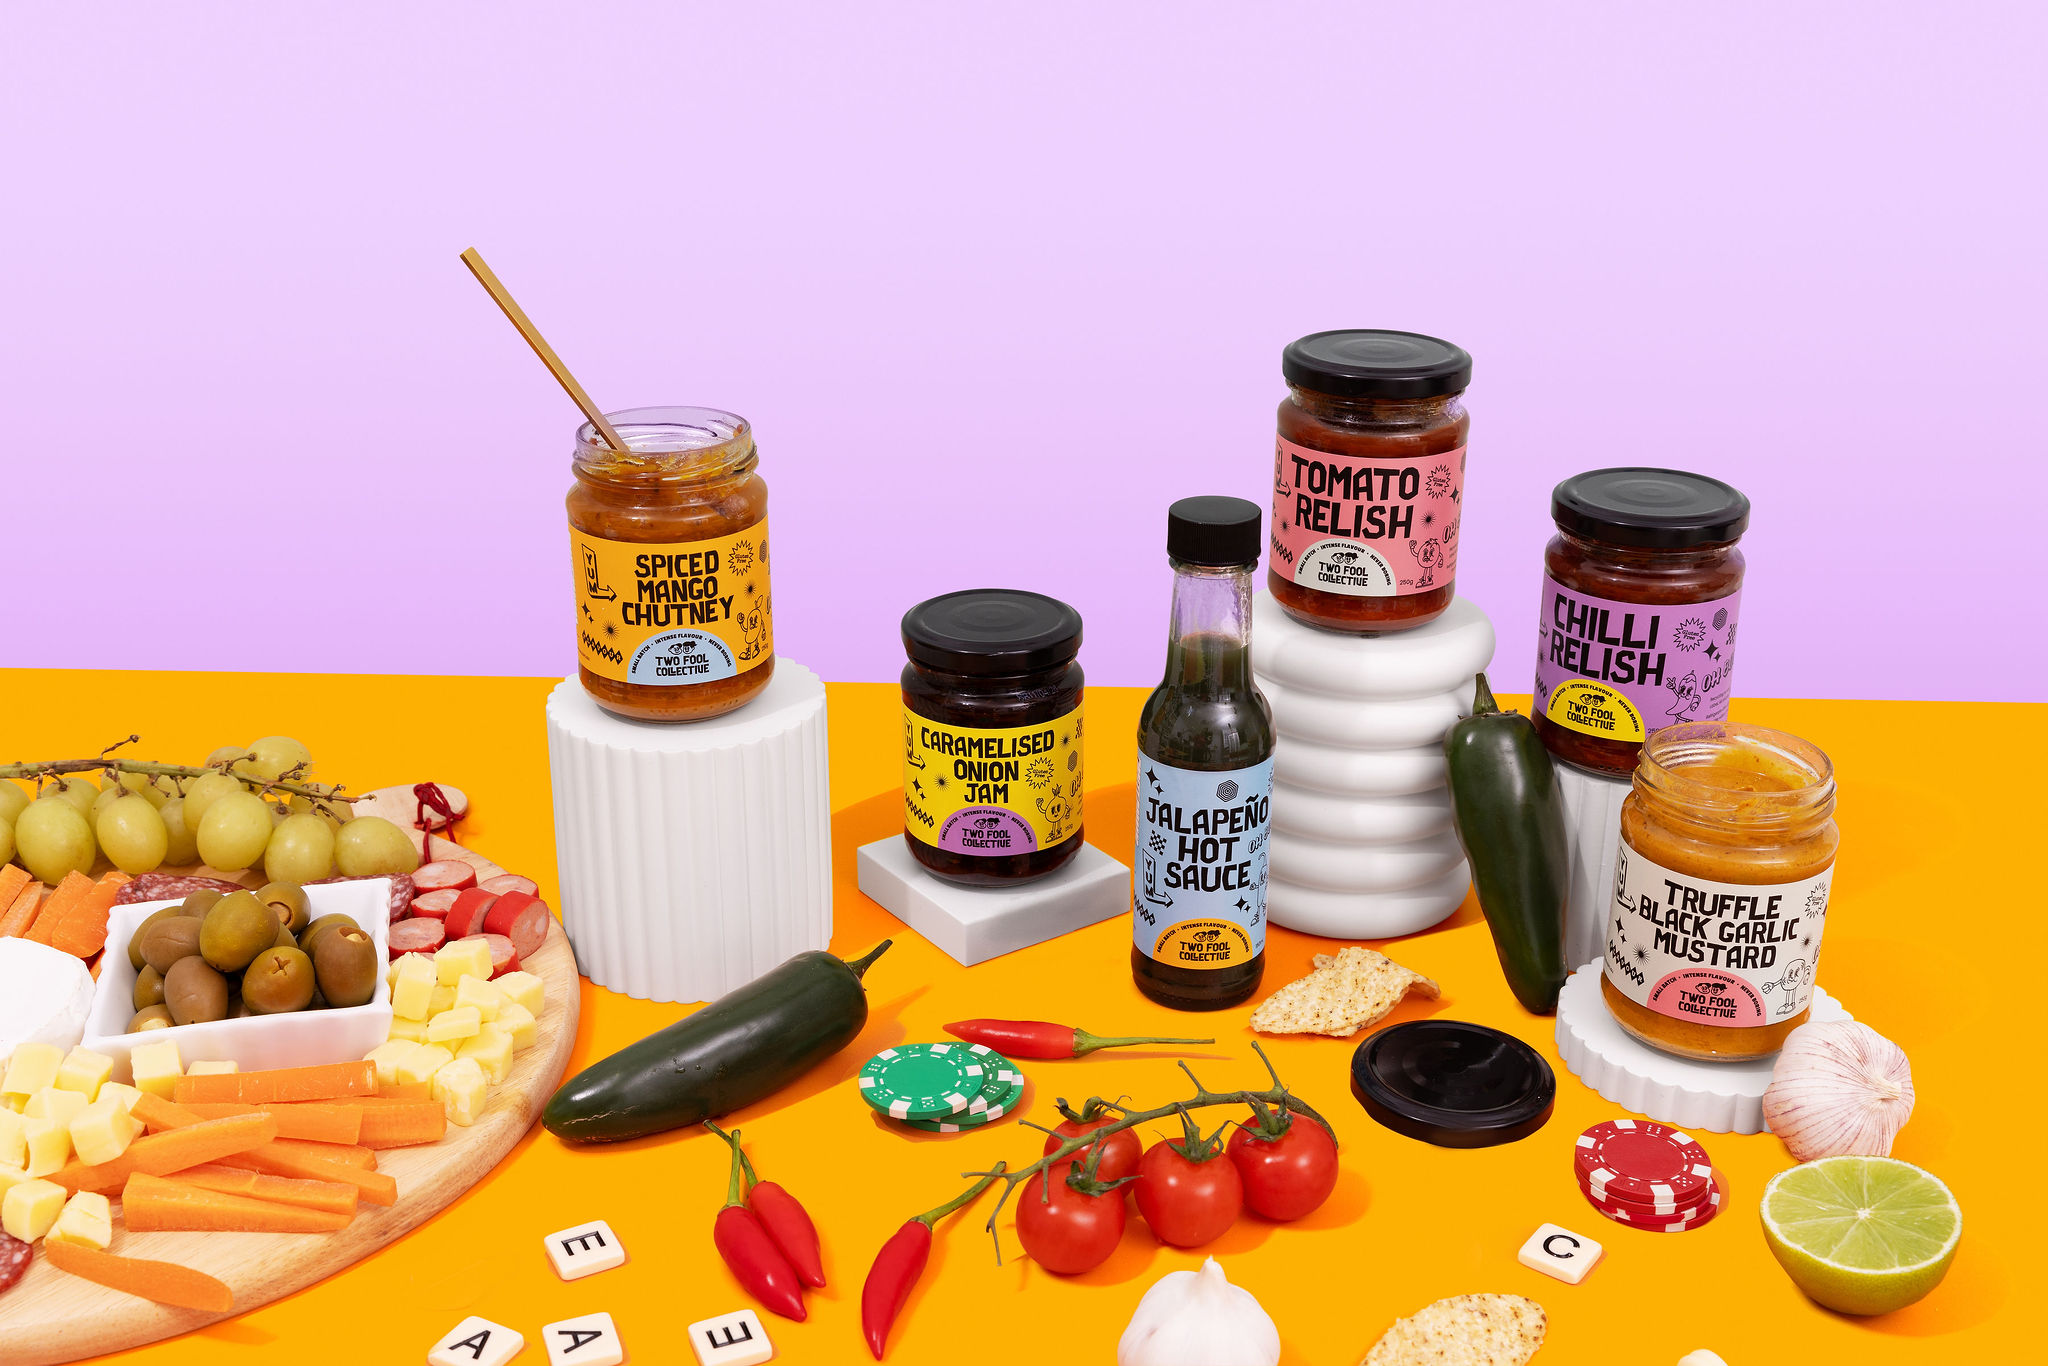 Colourful food product photography for a relish brand. Creative product photography by Colourpop studio